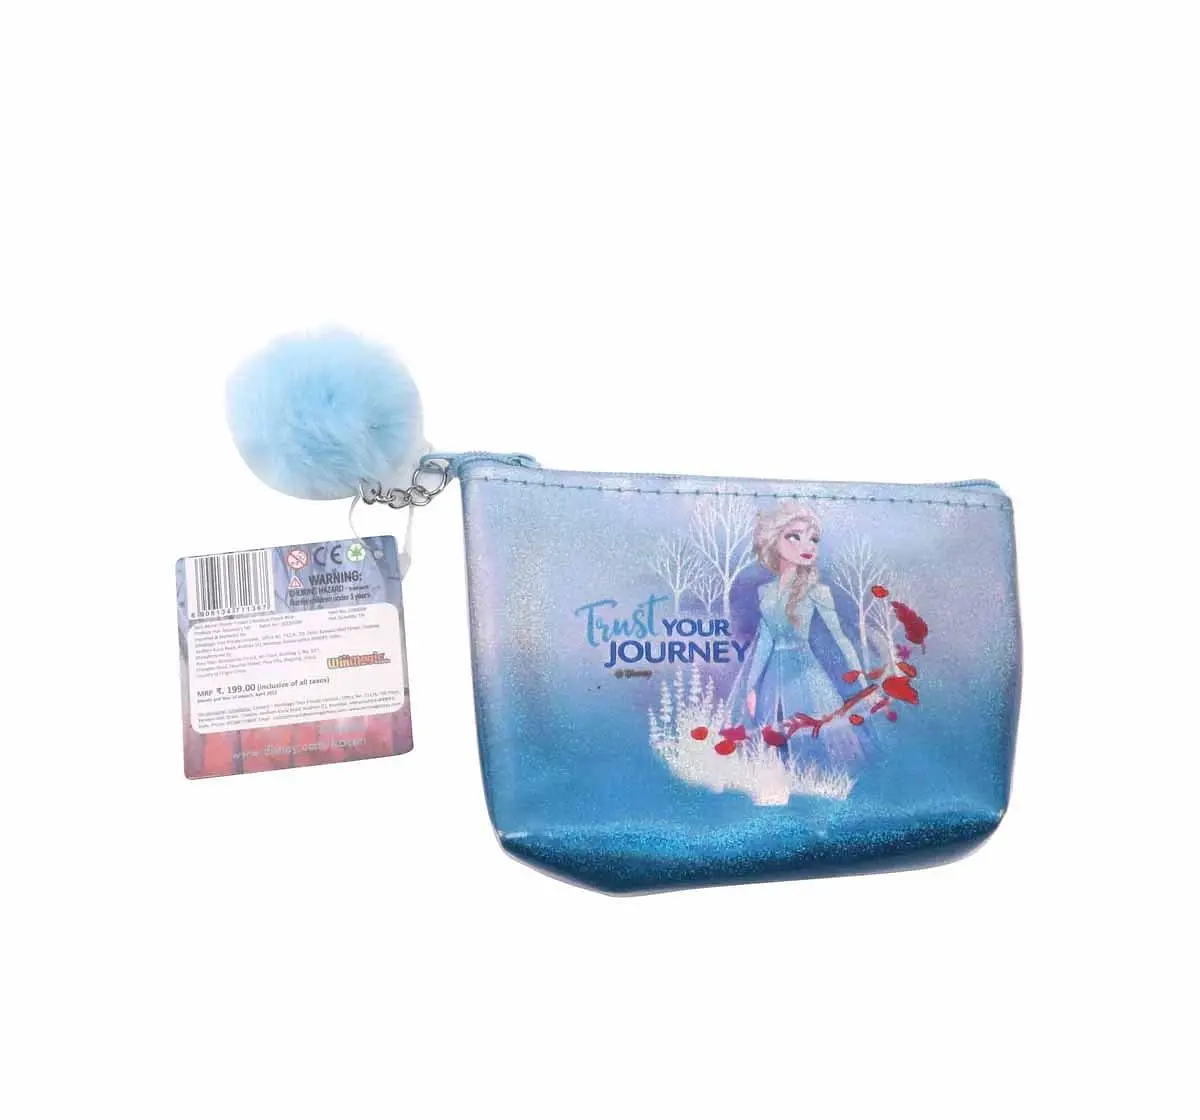 Disney Frozen II Cute Travel Makeup Portable Cosmetic Toiletry Pouch by Li'l Diva For Girls 3 years And Above, Blue